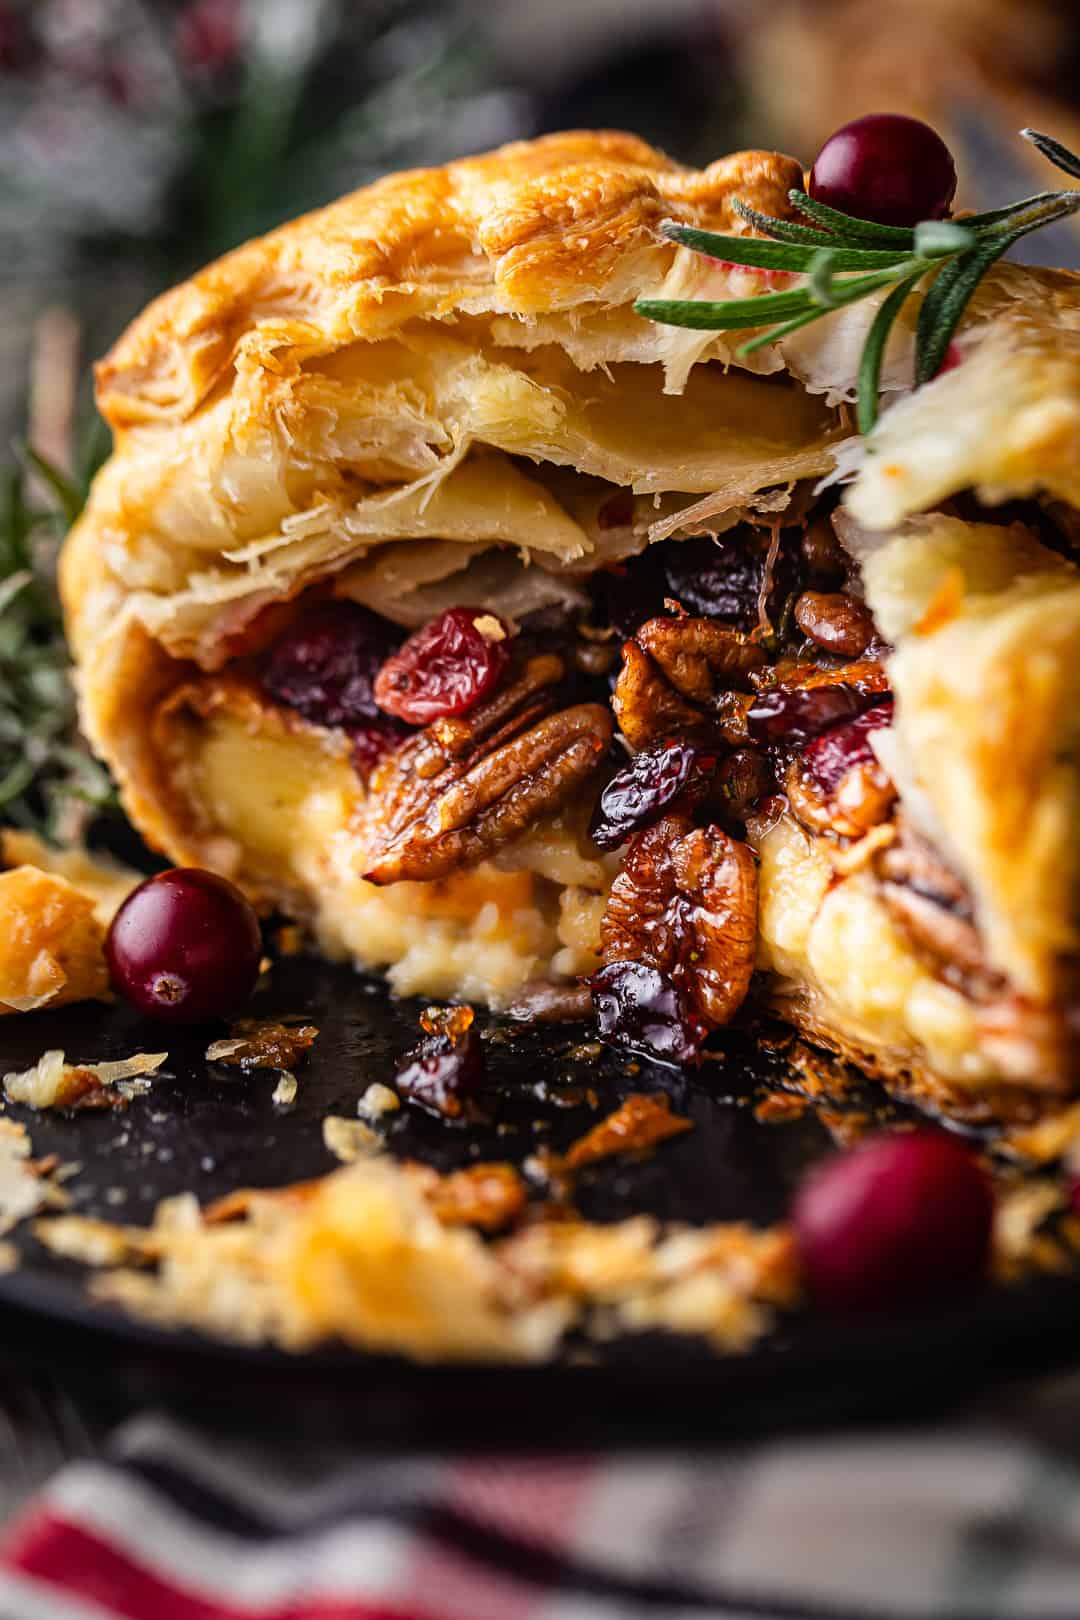 Baked brie recipe, cut open to display the oozy filling inside.